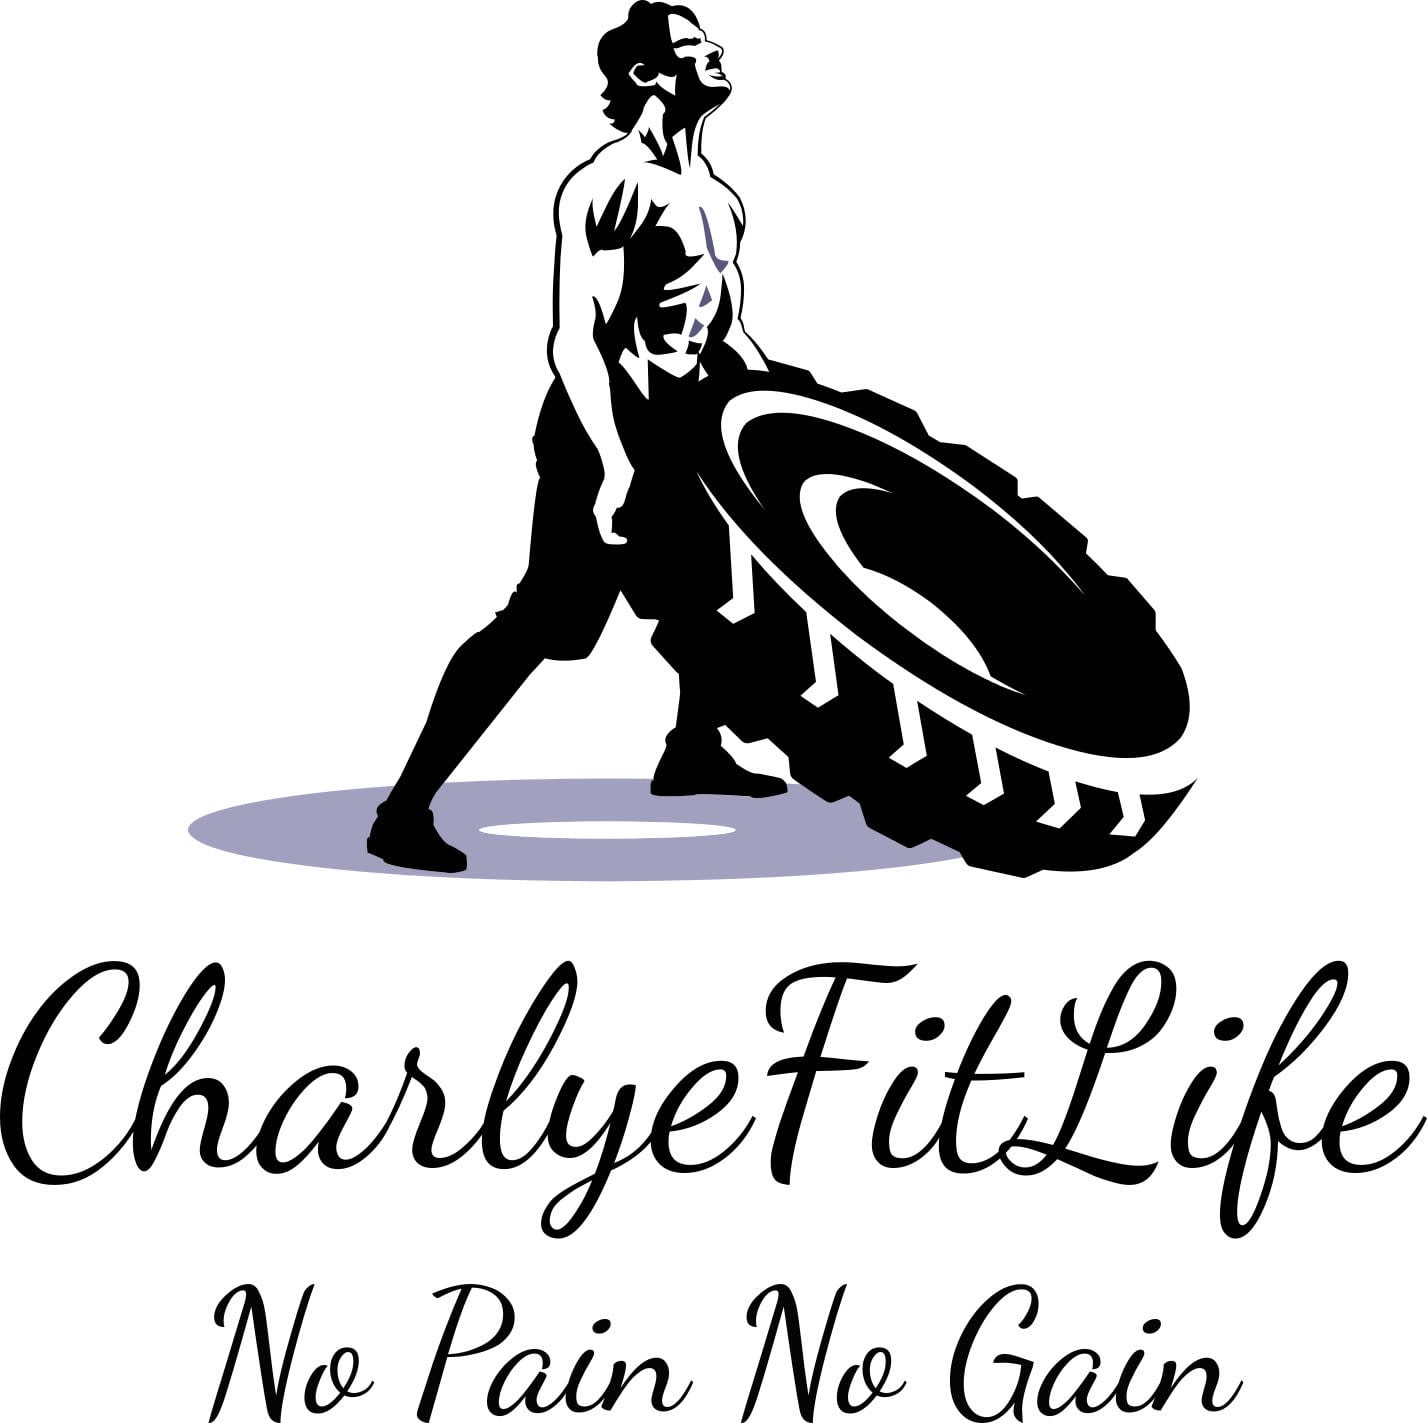 Charlye Fitlife